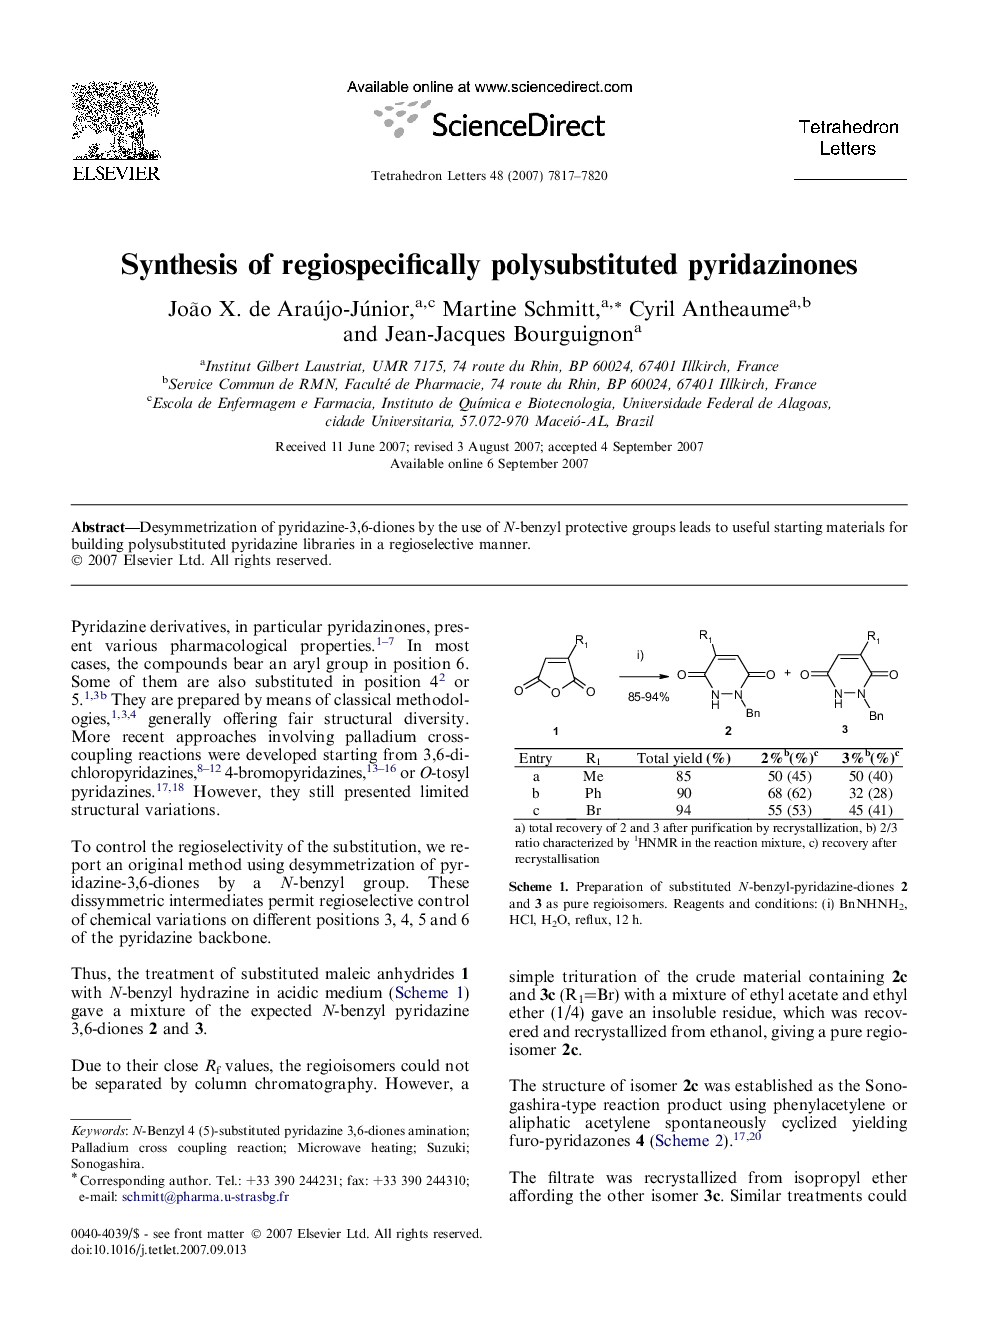 Synthesis of regiospecifically polysubstituted pyridazinones